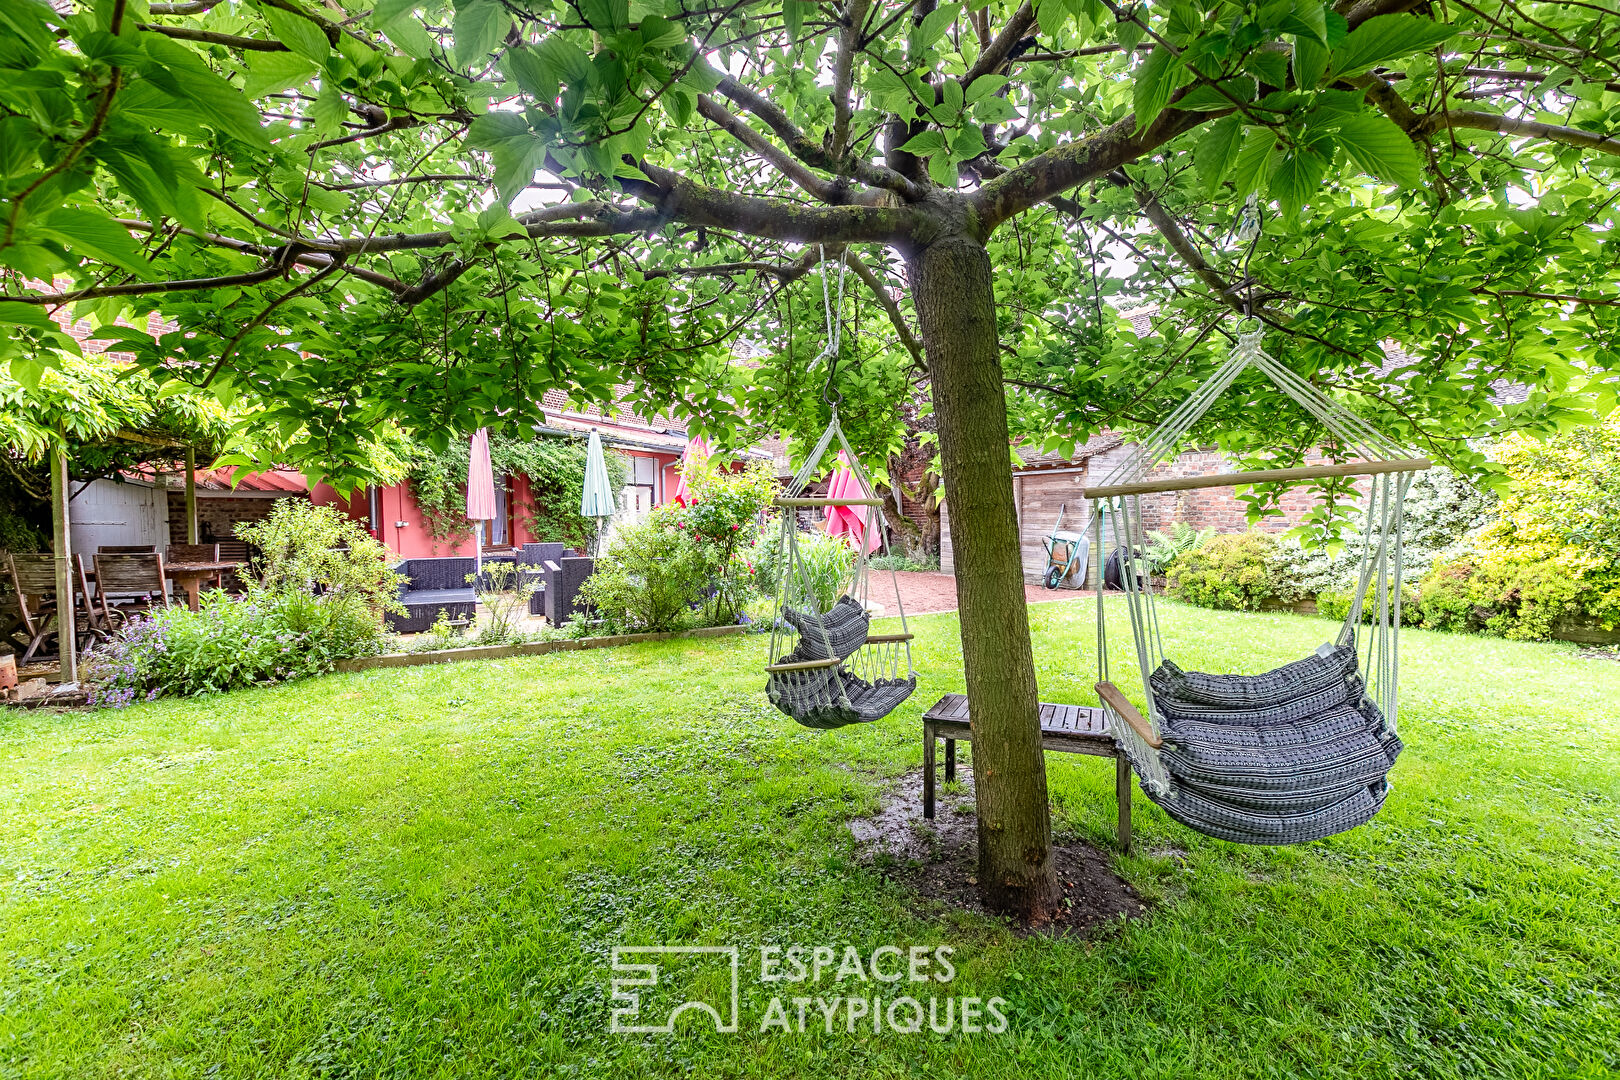 Renovated family house with converted annex and pretty garden in the town center.